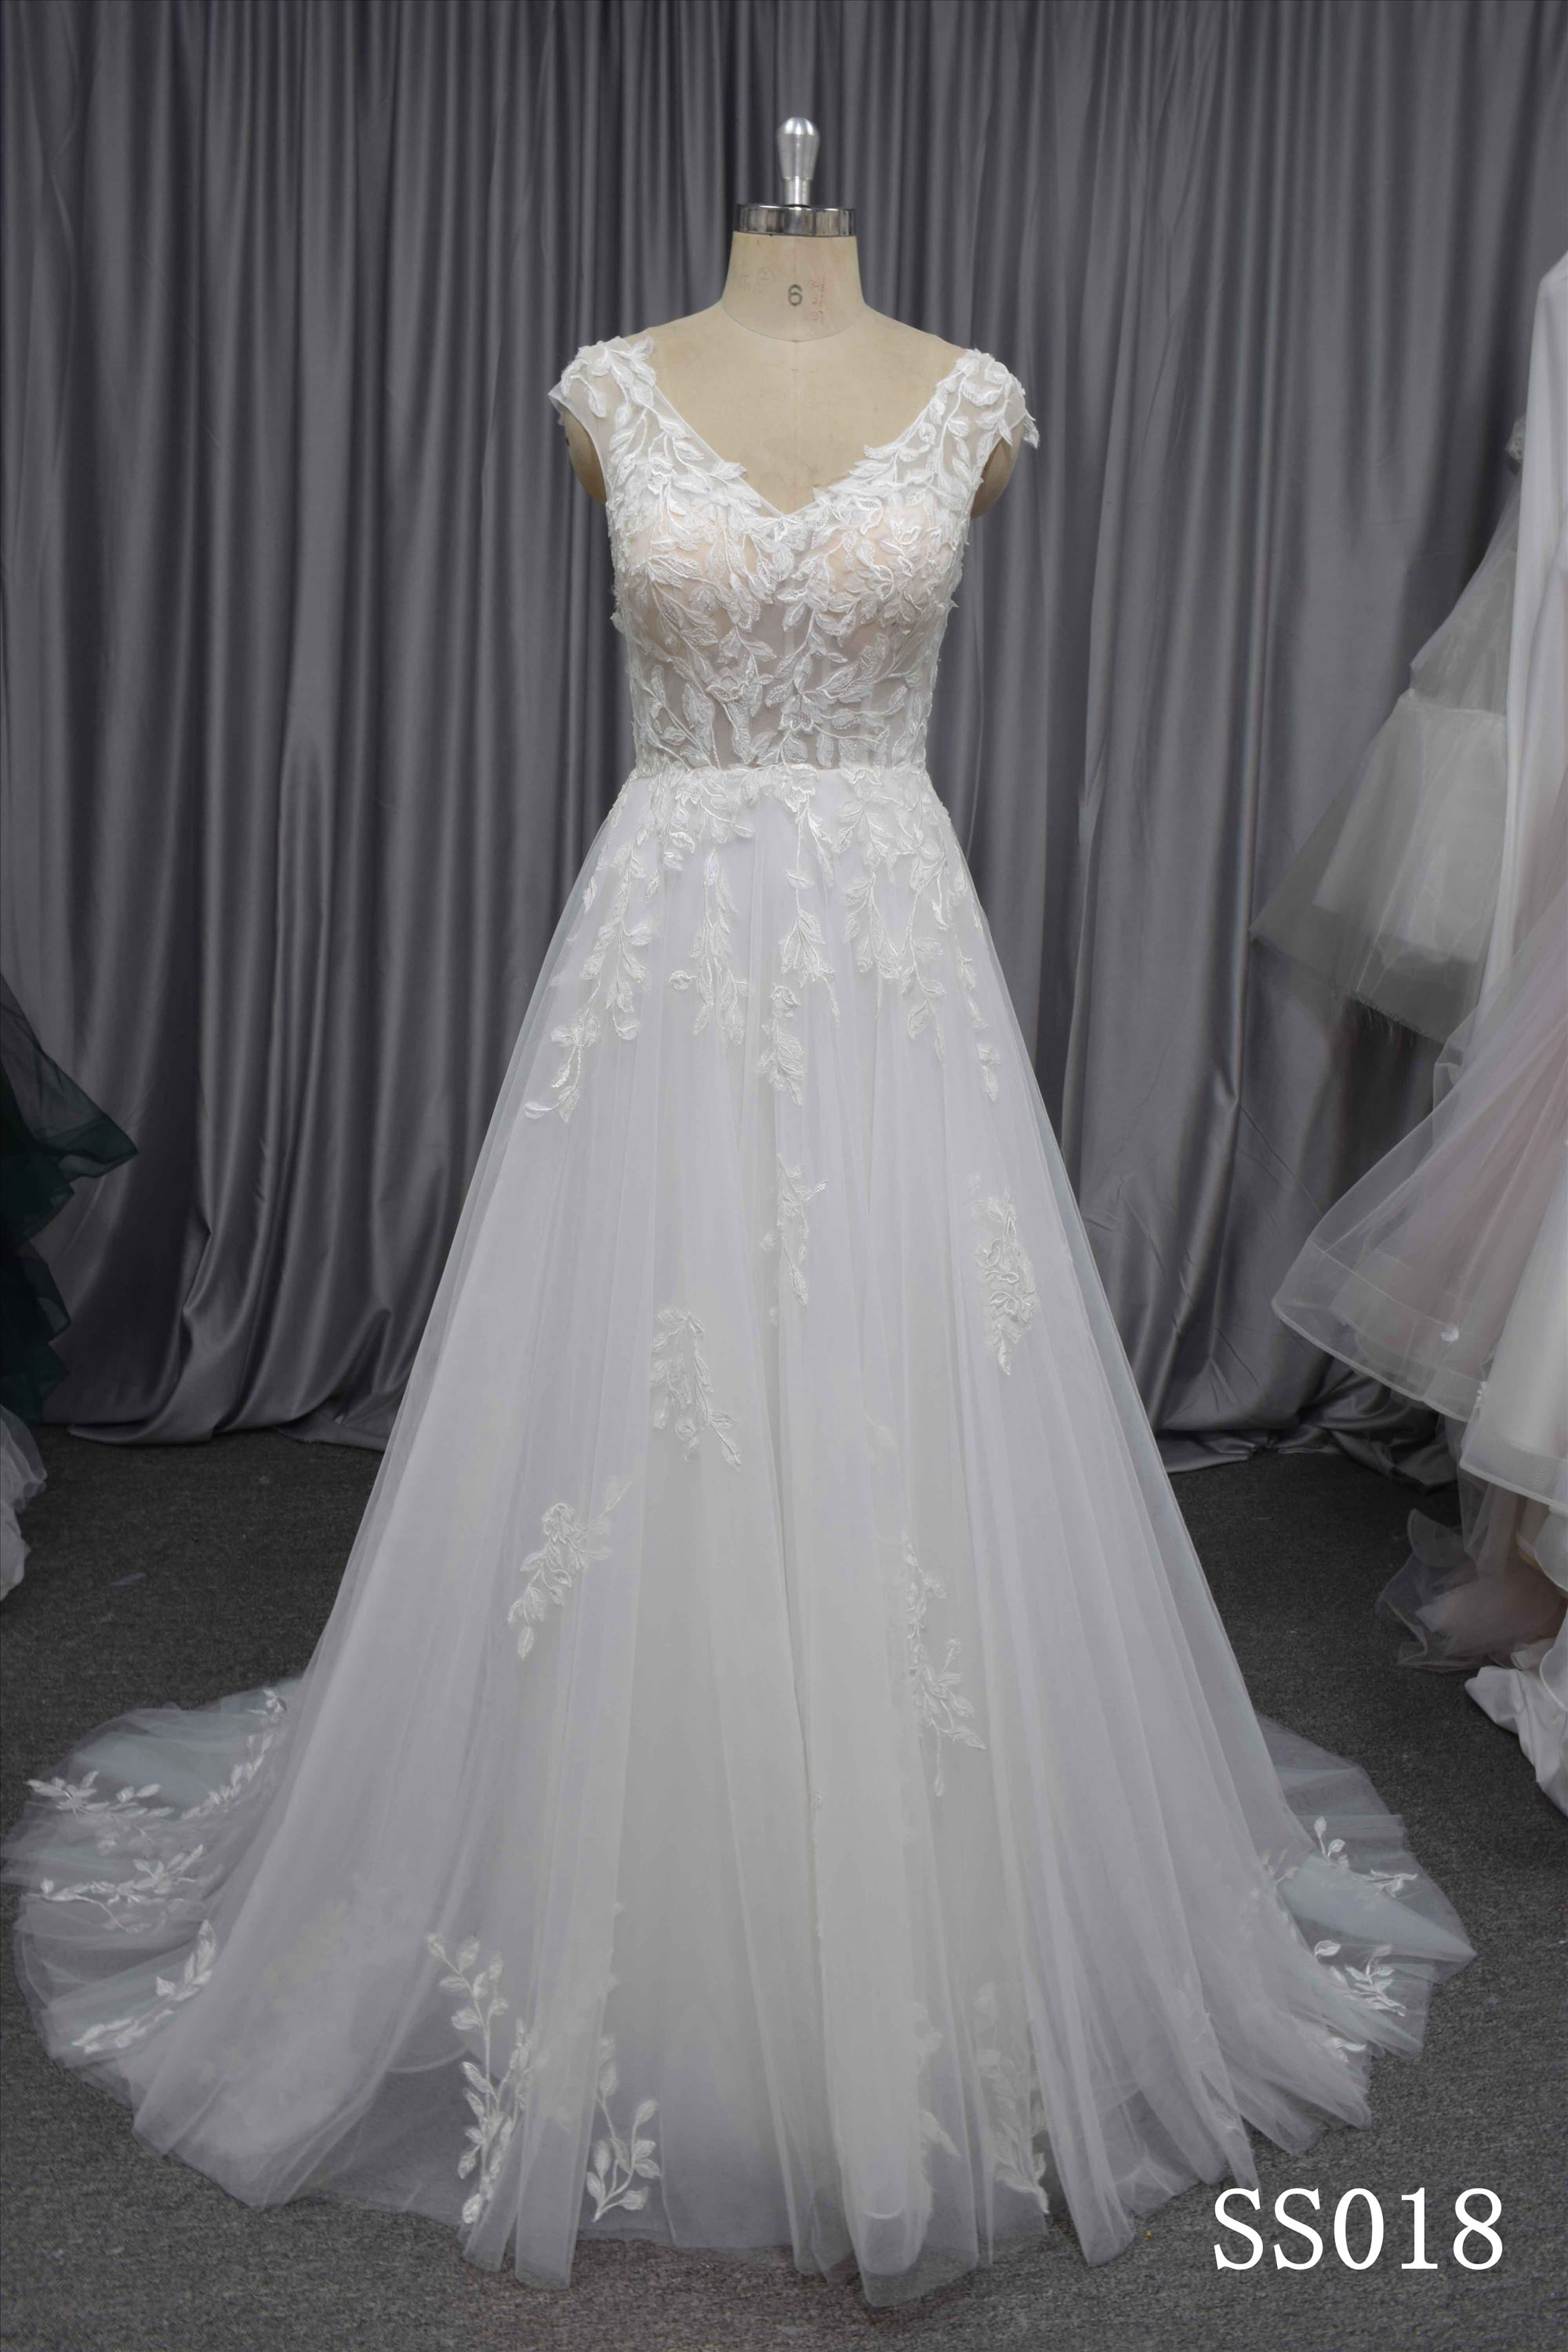 Elegant A line wedding dress with delicate lace in stock size 8